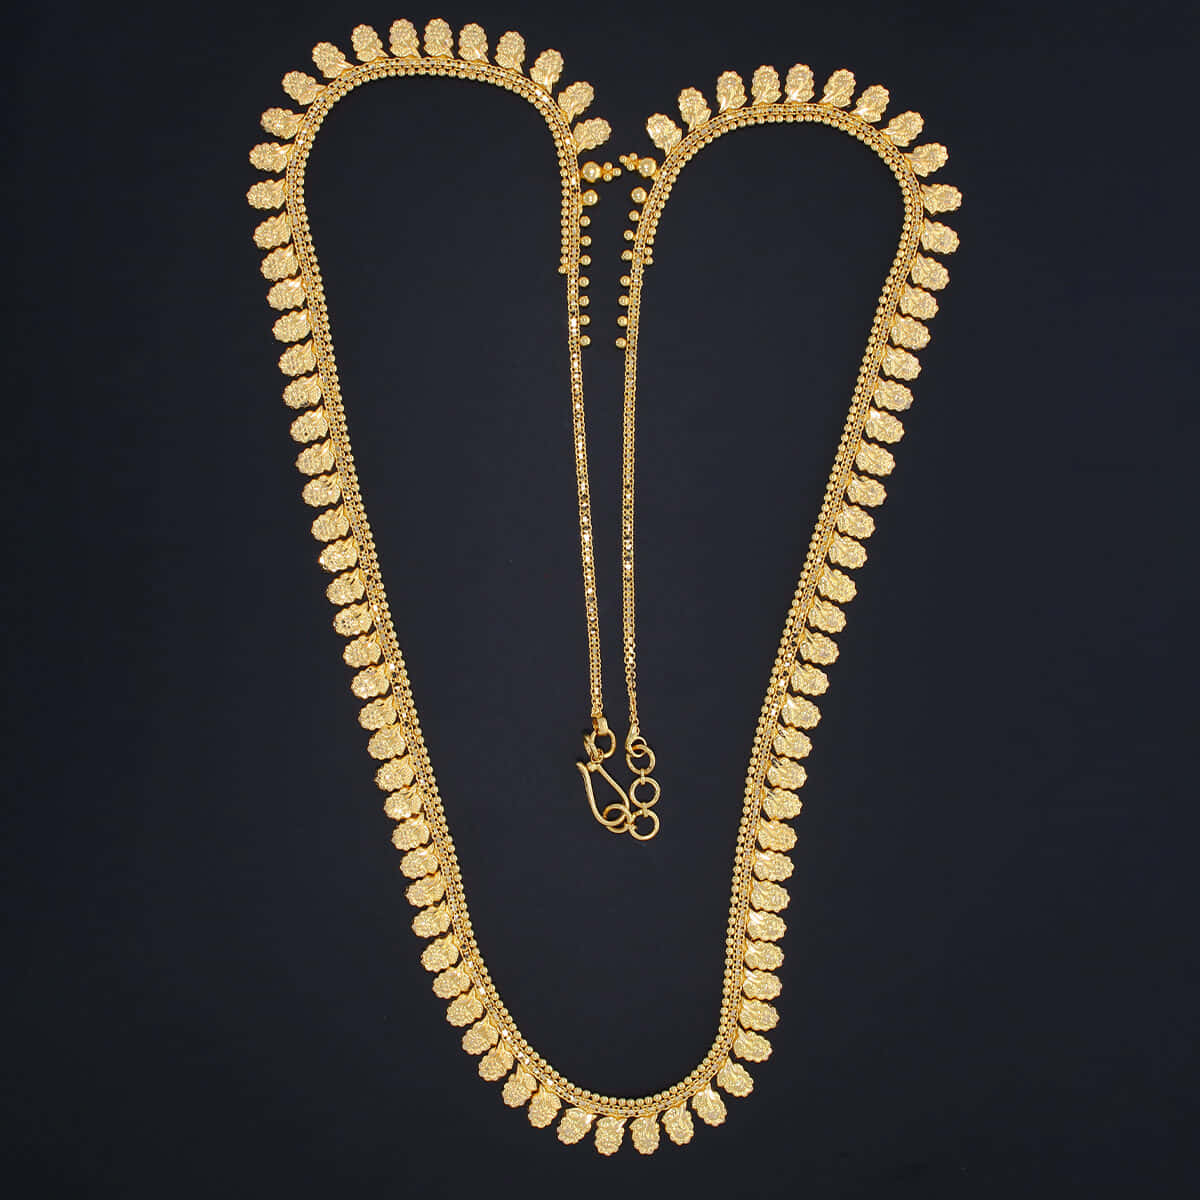 "Accessorize in Style with this Gold Chain" Wallpaper